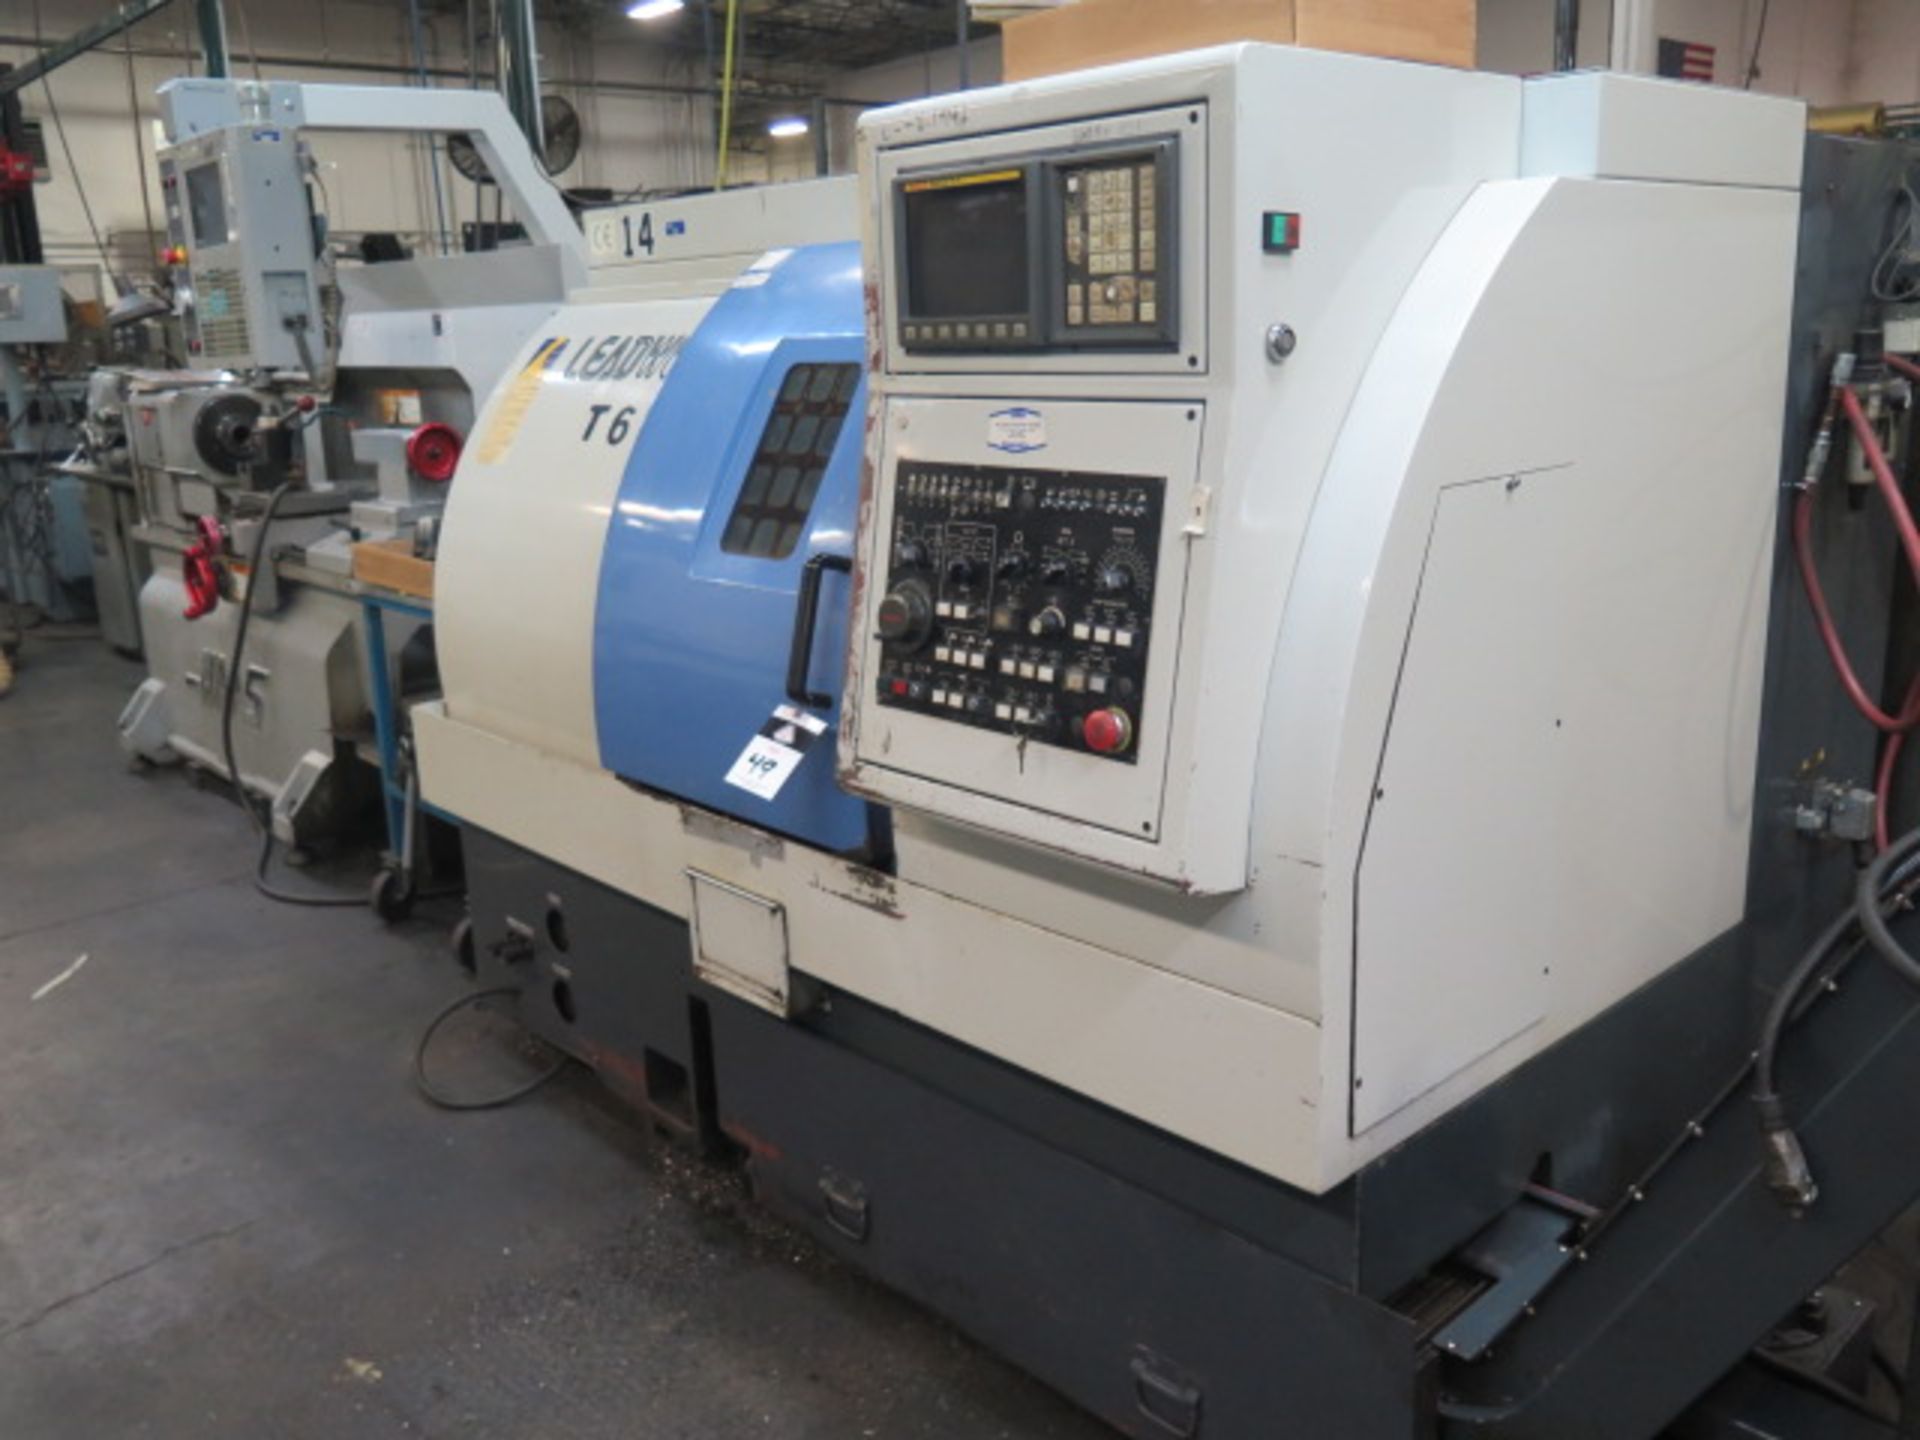 Leadwell T6 CNC Turning Center s/n L2TJJ0823 w/Fanuc Series 0-T Controls, Tool Presetter, SOLD AS IS - Image 3 of 12